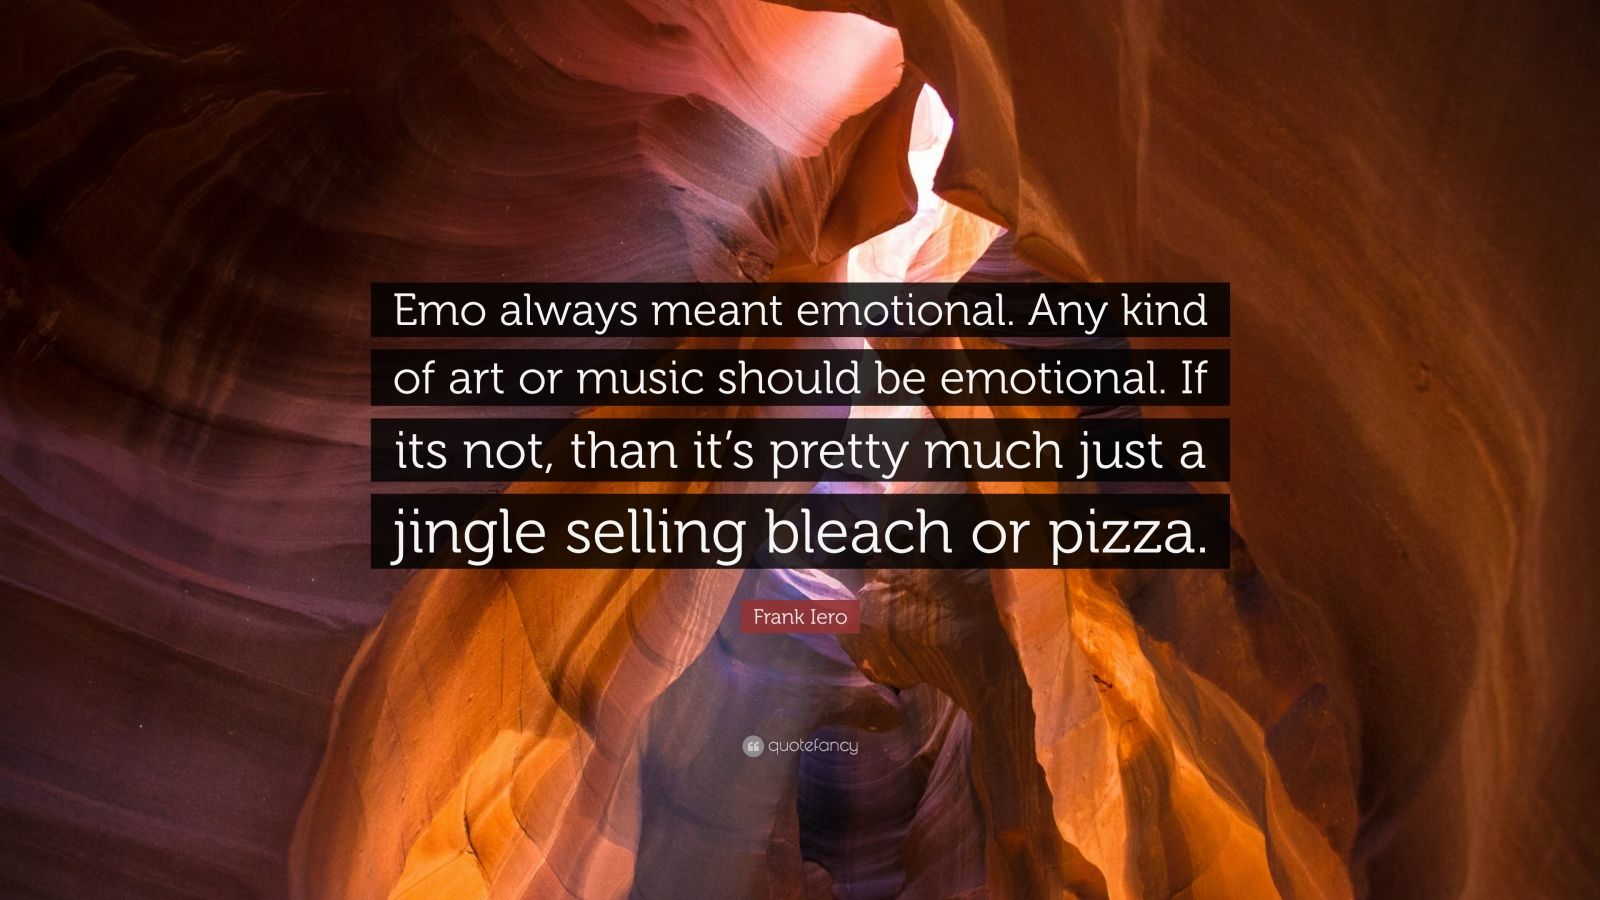 Frank Iero Quote: "Emo always meant emotional. Any kind of art or music should be emotional. If ...